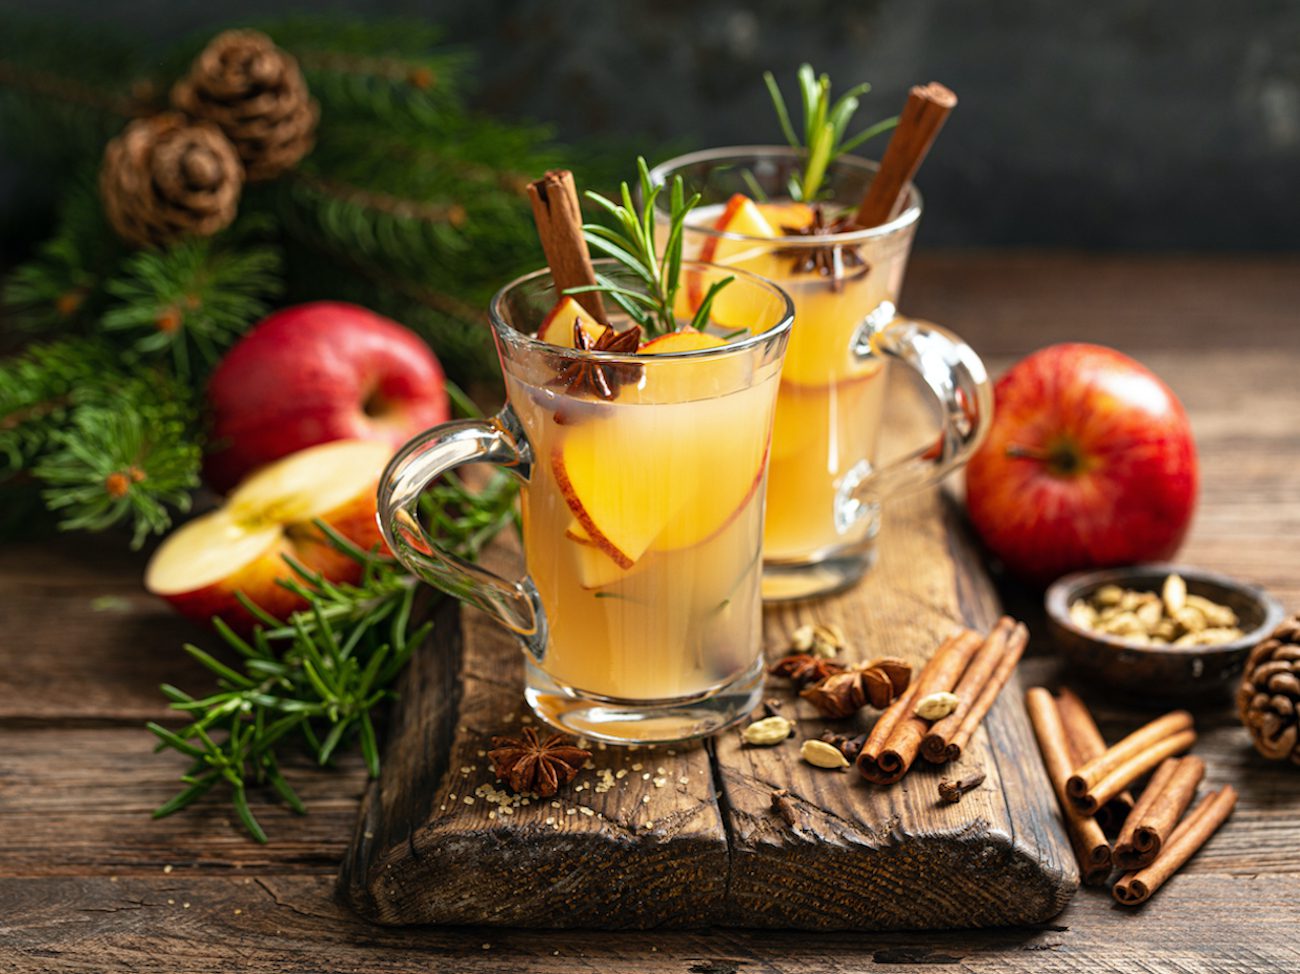 Baked apple punch with cinnamon sticks